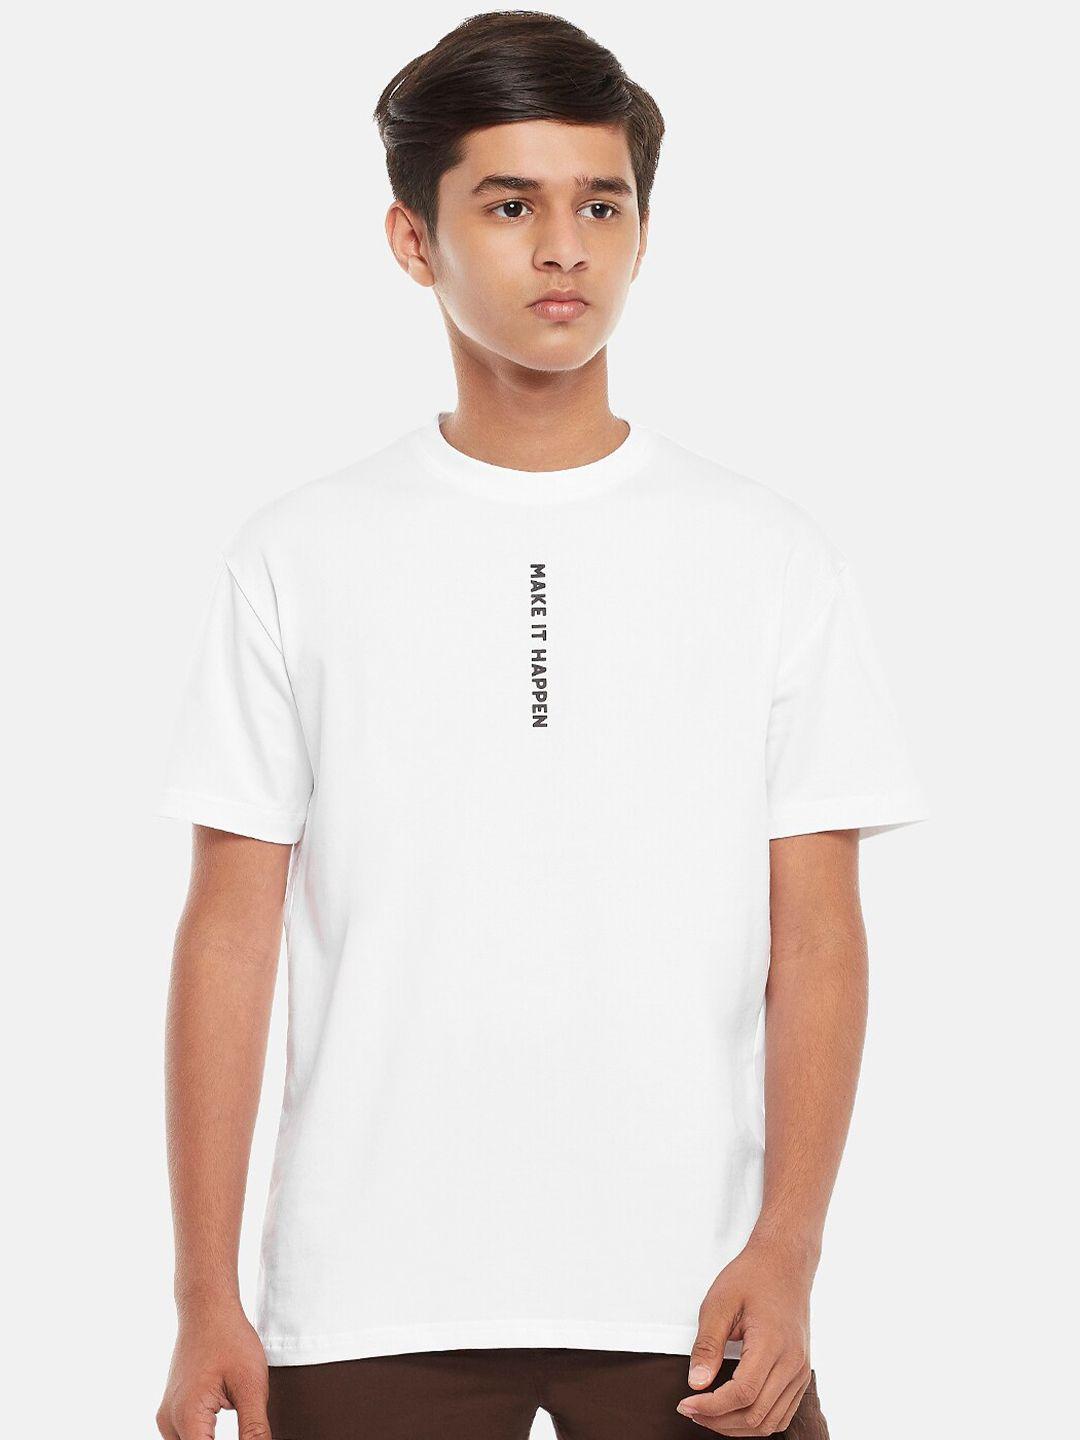 coolsters by pantaloons boys white printed t-shirt